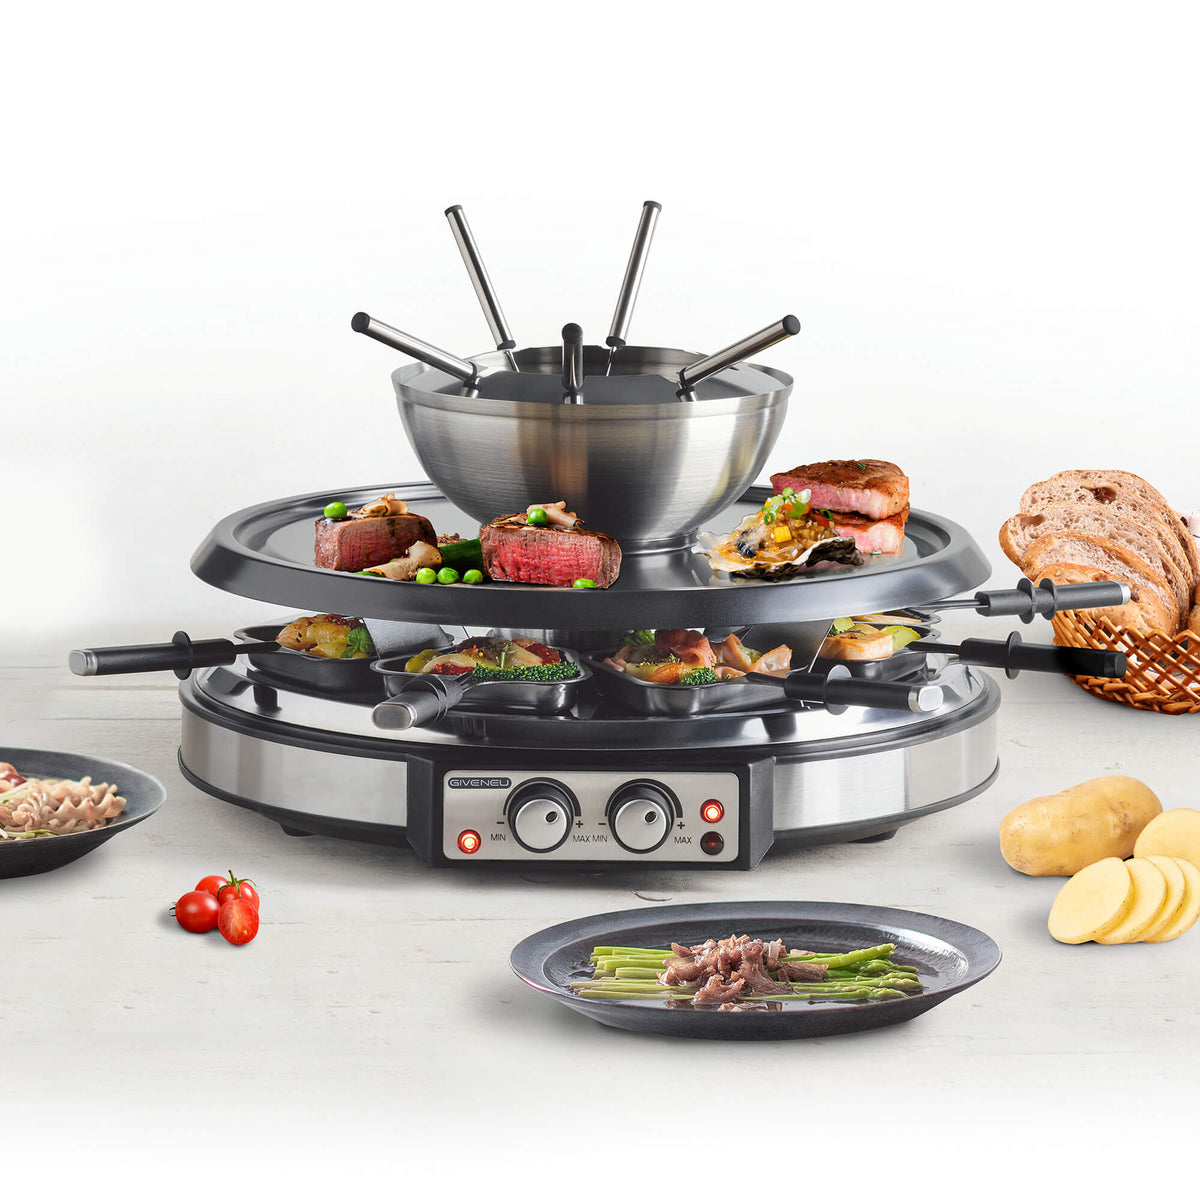 How to Make the Most of a Tabletop Raclette Grill